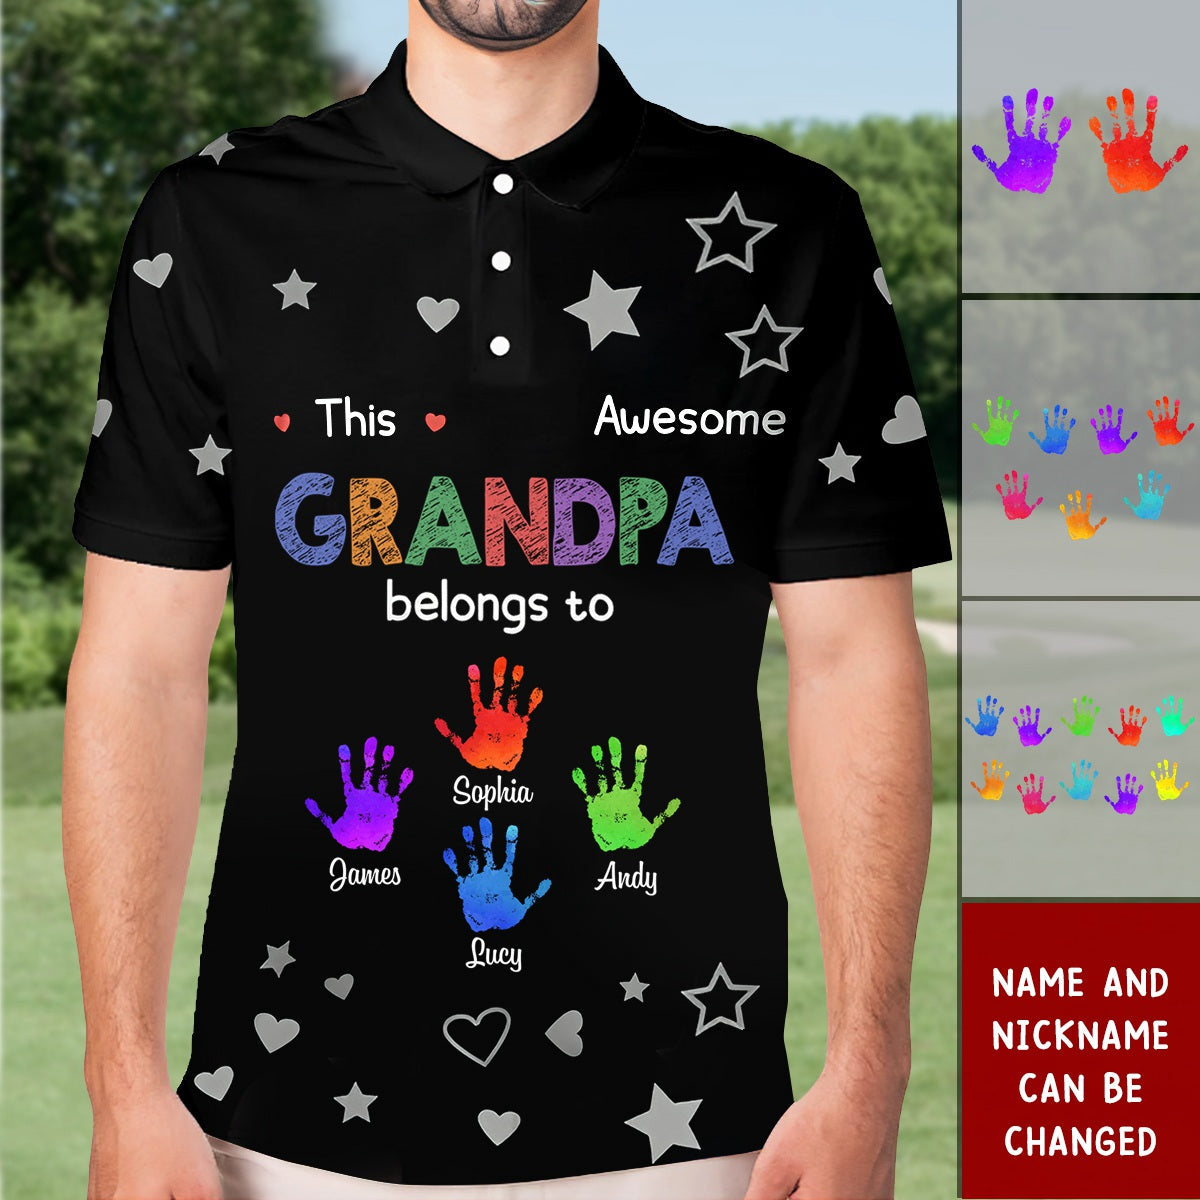 This Awesome Daddy Belongs To - Personalized Polo Shirt